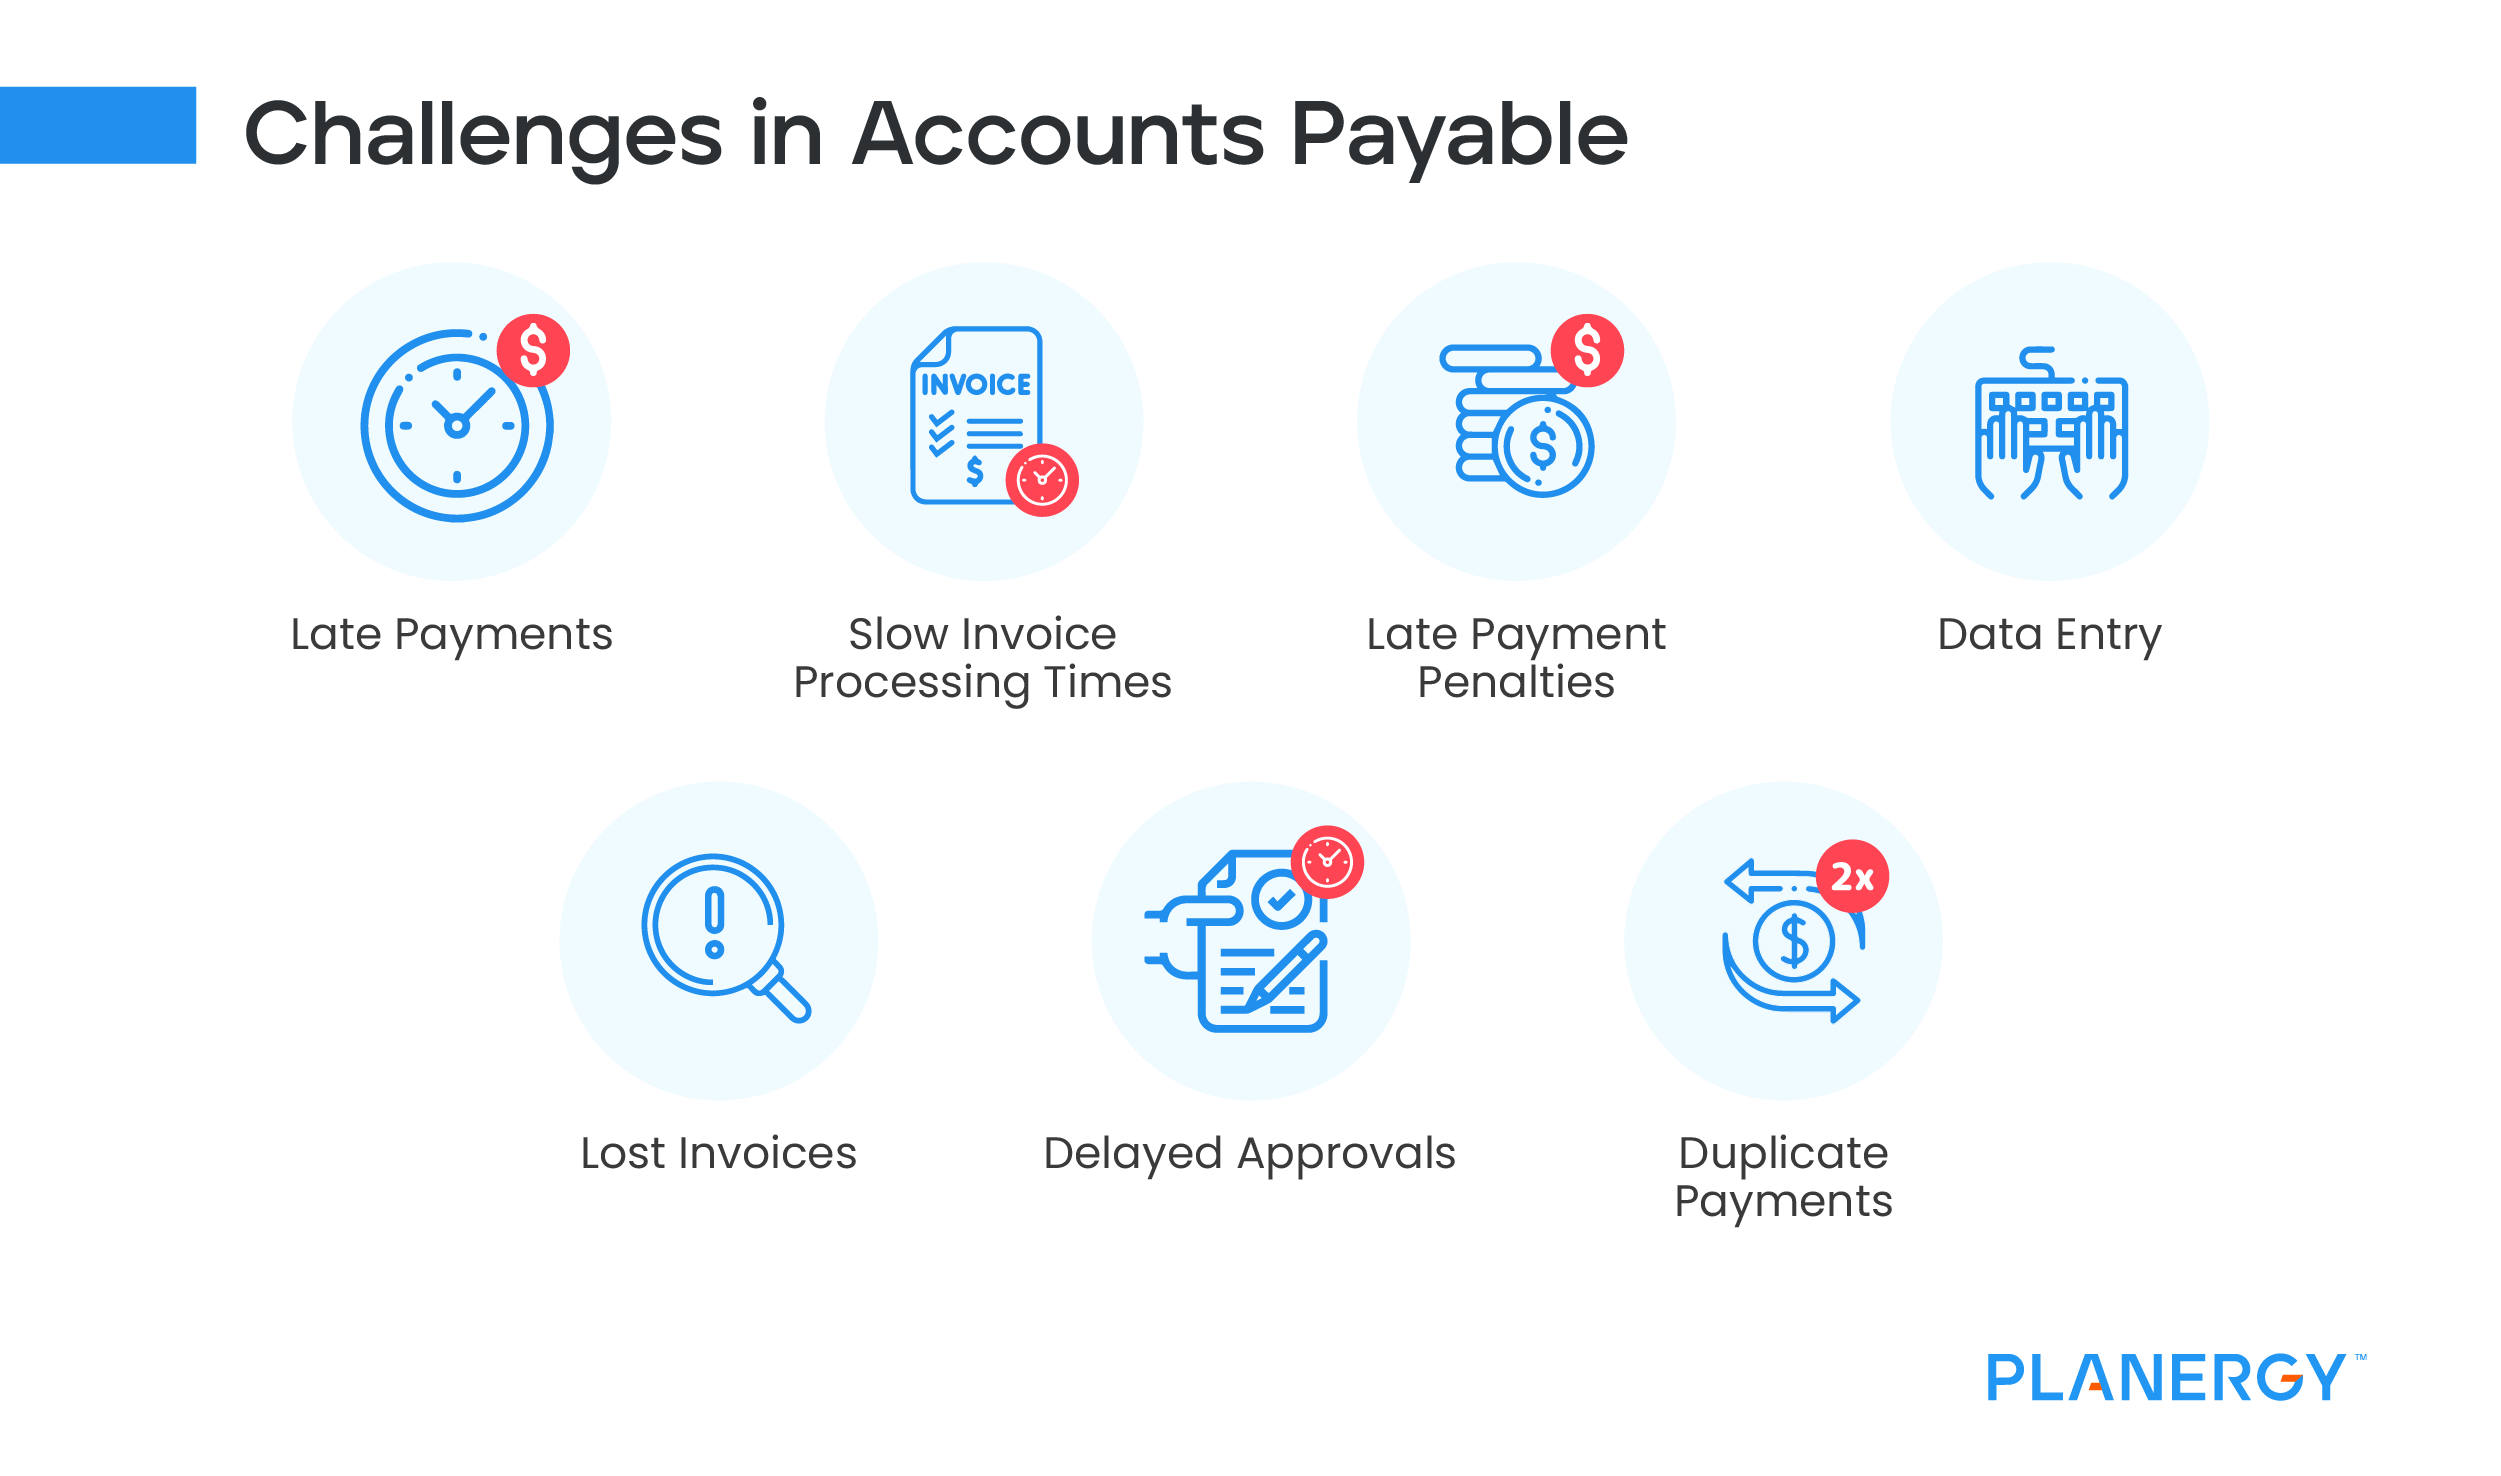 Challenges in Accounts Payable